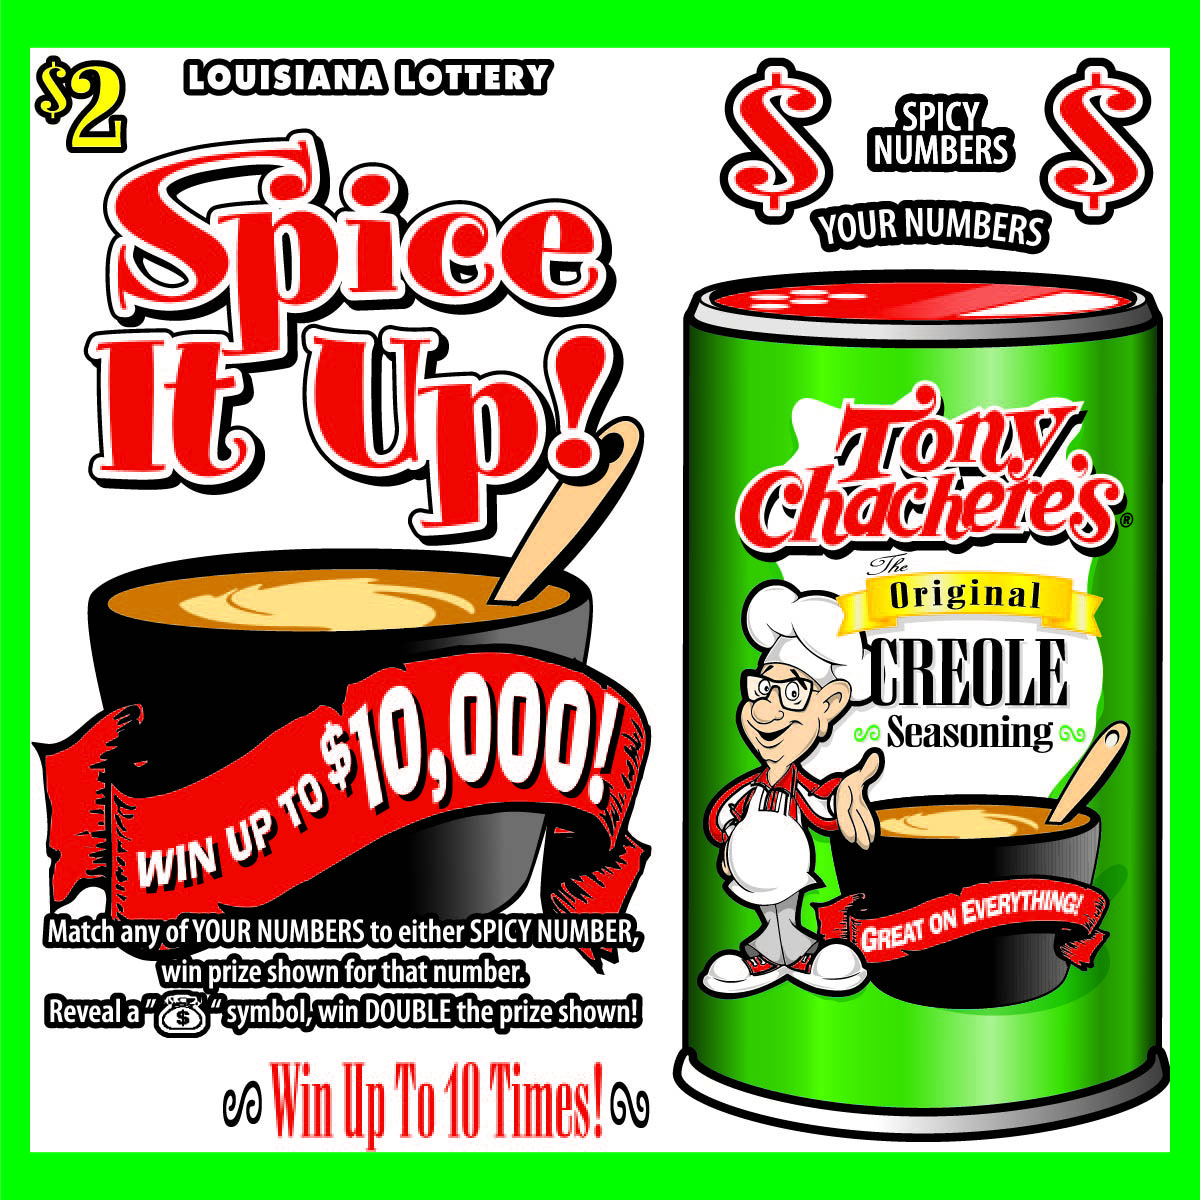 Louisiana Lottery Partners with Tony Chachere’s Creole Foods – Launches a Spicy New Scratch-Off Game